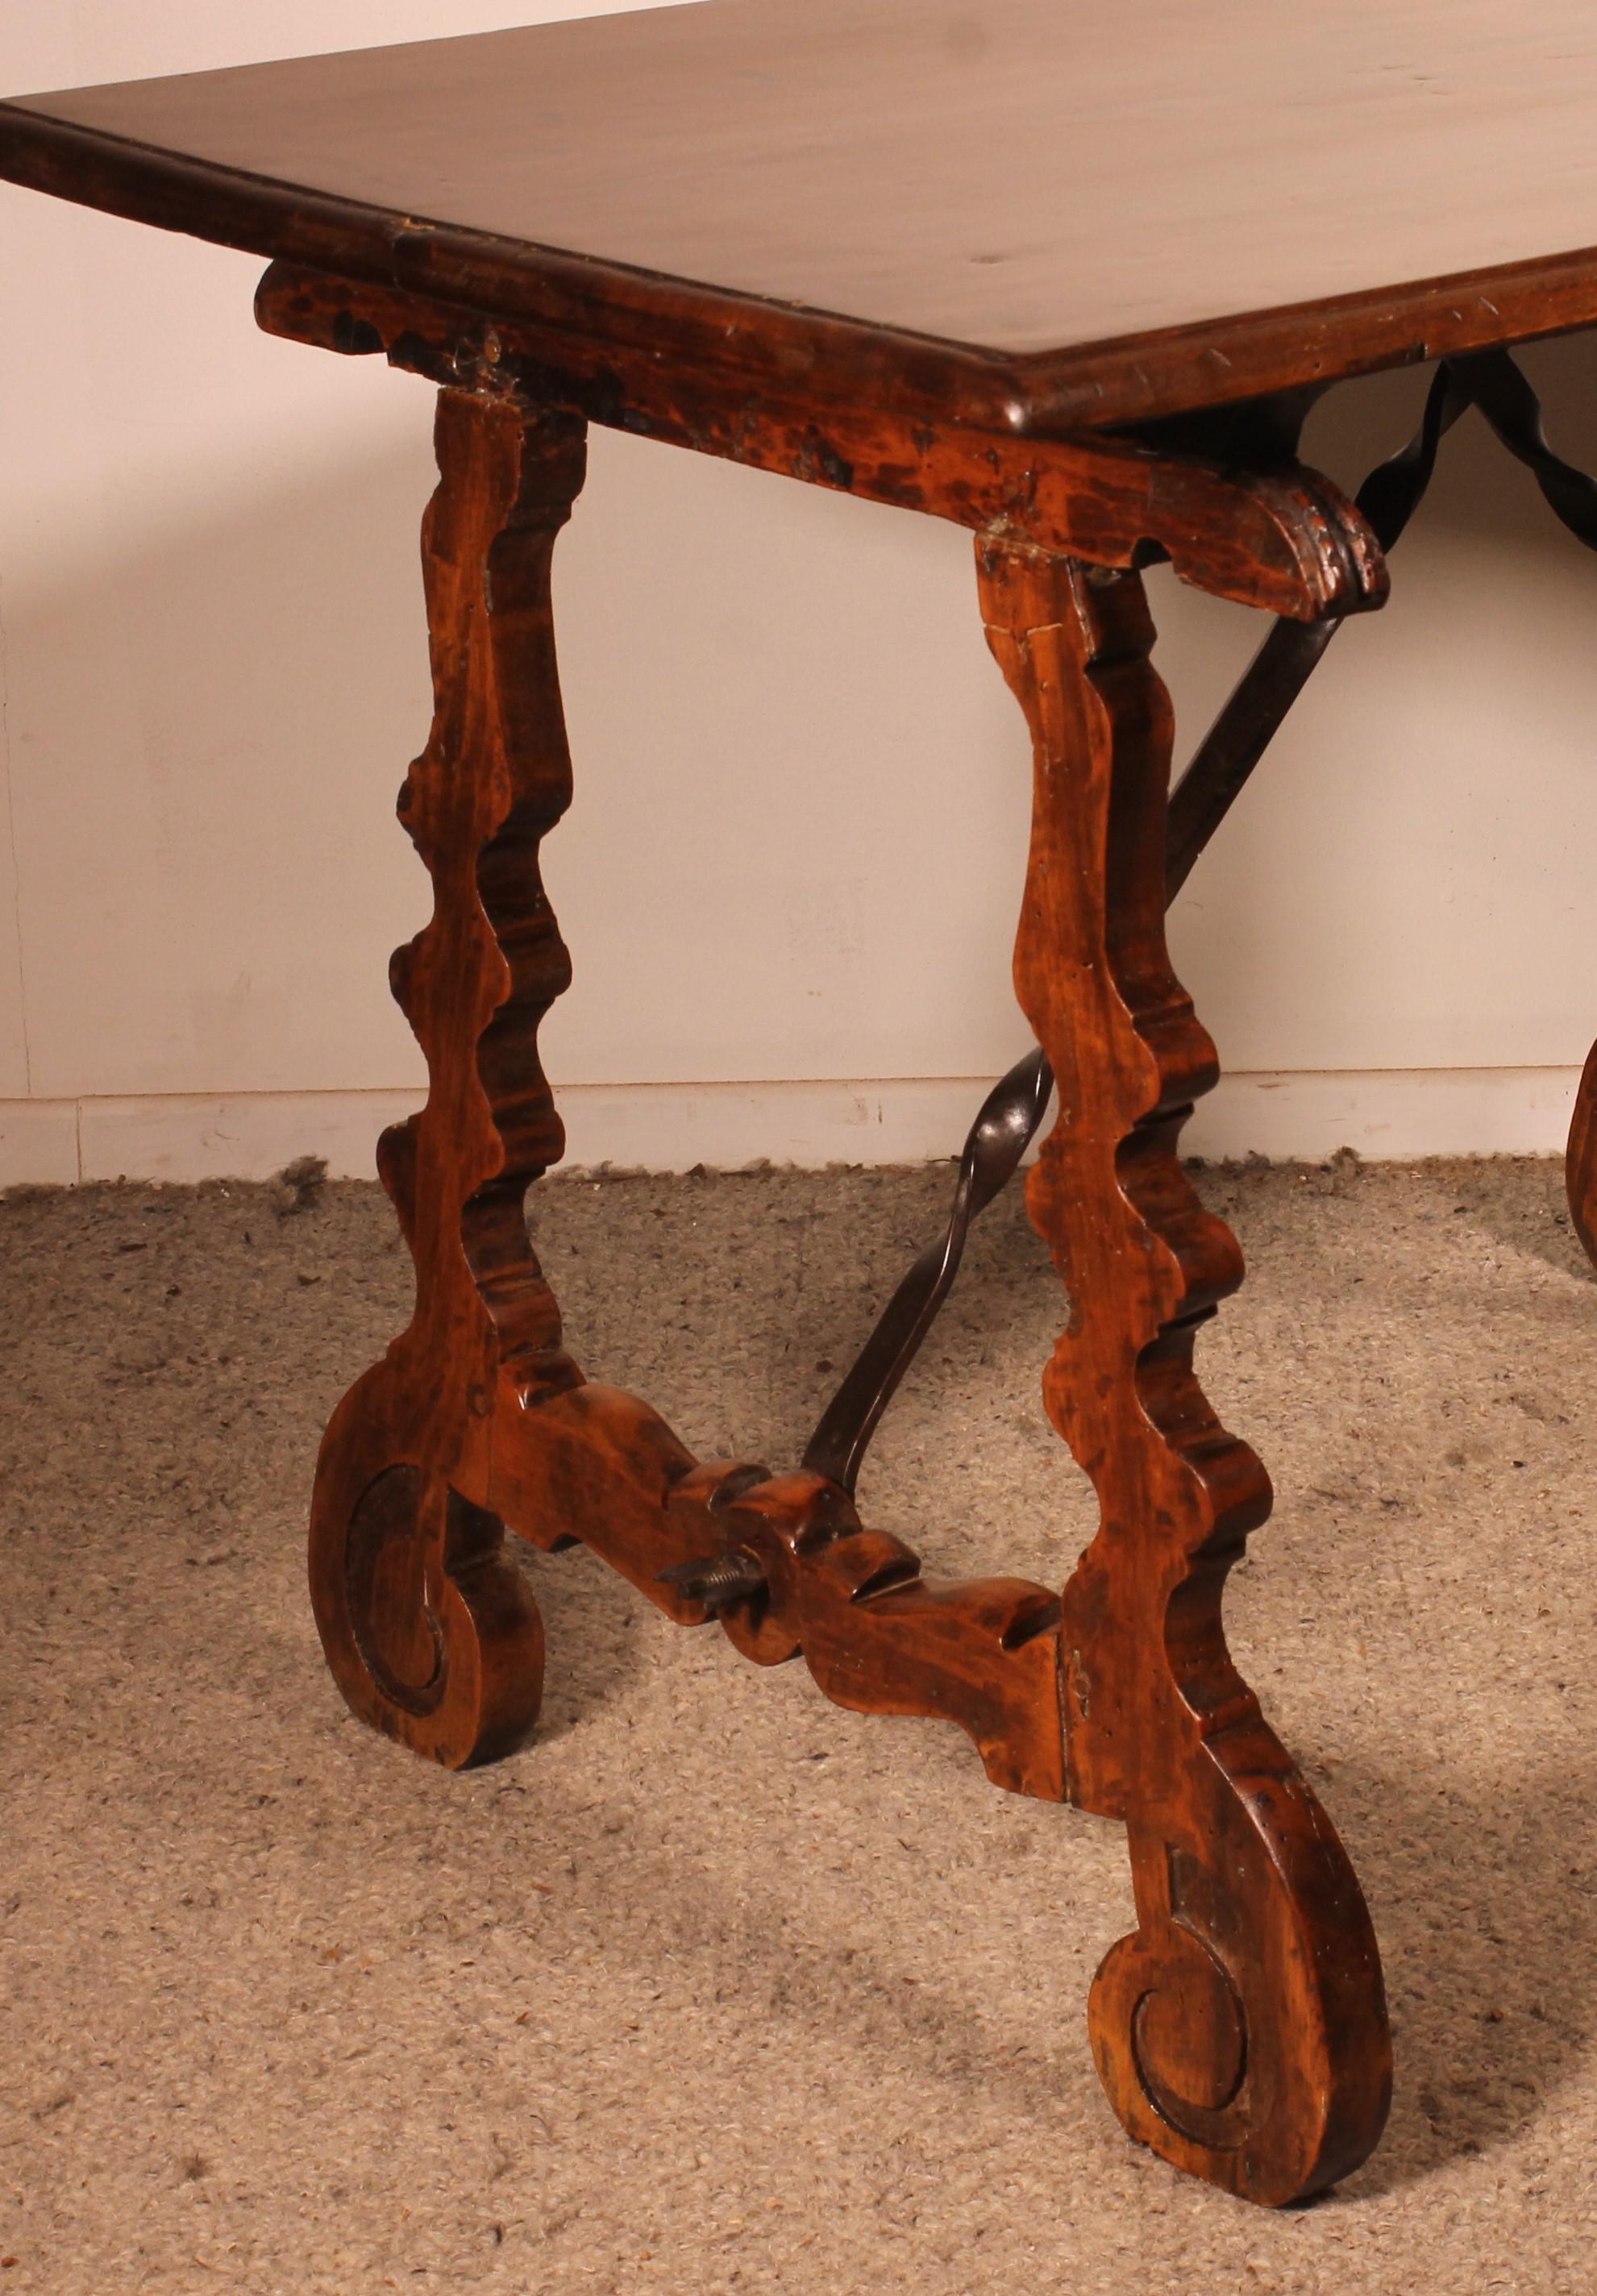 Spanish renaissance table in walnut from the 17th century from Catalonia

rare table which has a very beautiful one-piece walnut top with a corbin beak

the table has its original hinges on the base which allows it to be fold it if necessary.